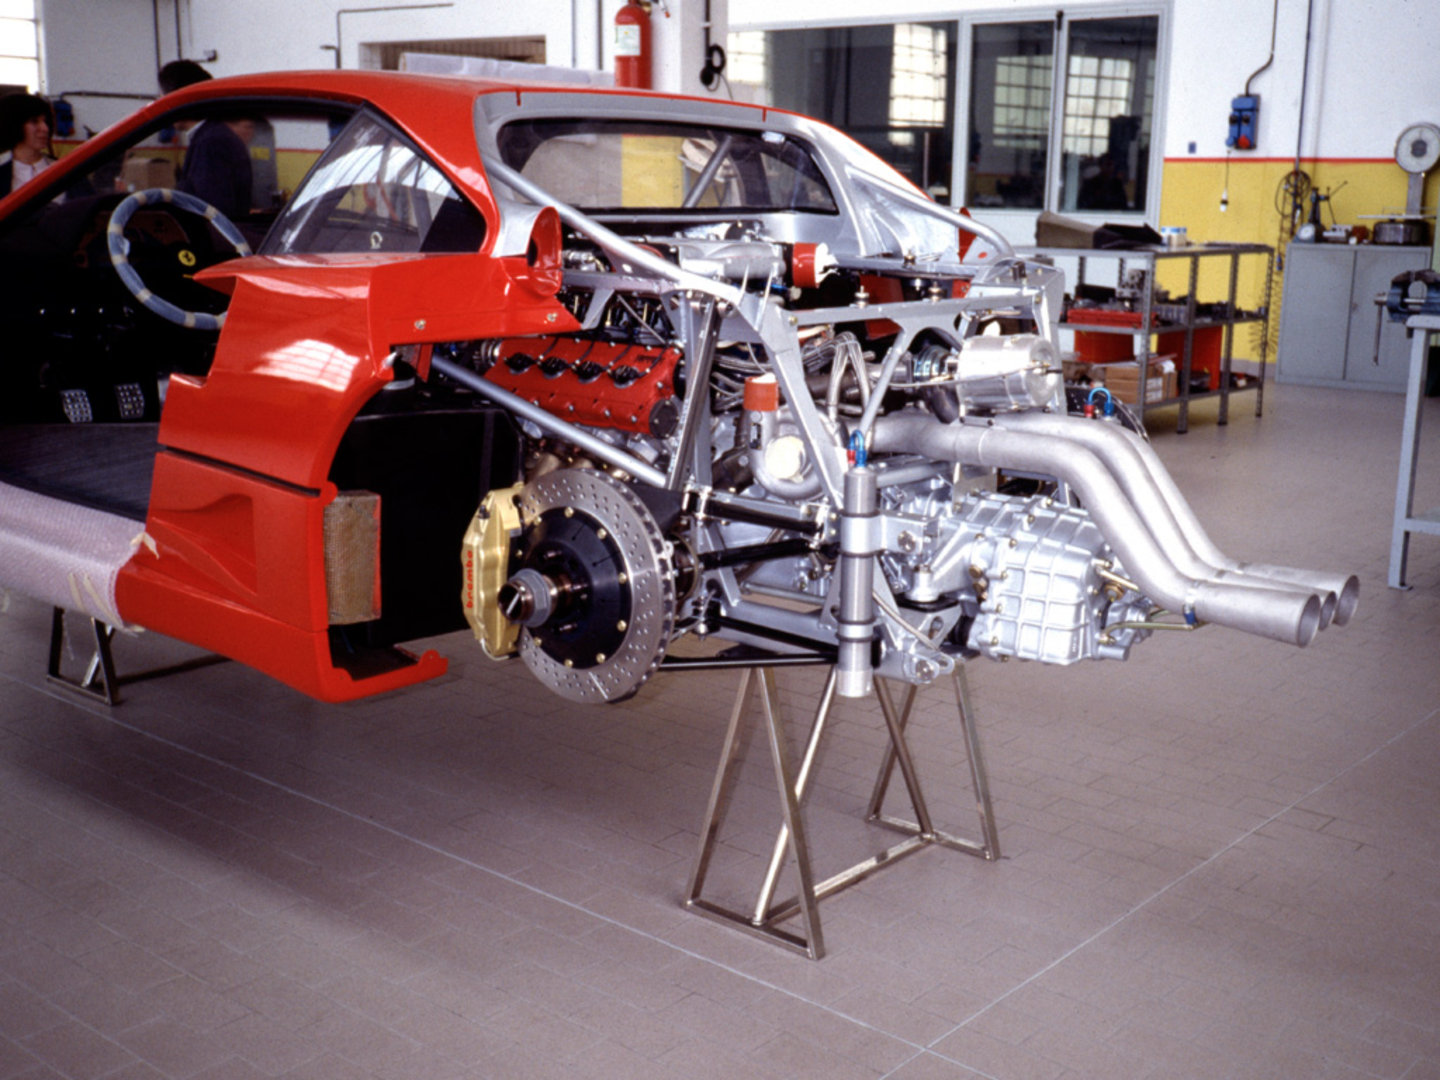 This Is What The Guts Of A Ferrari F40 Look Like